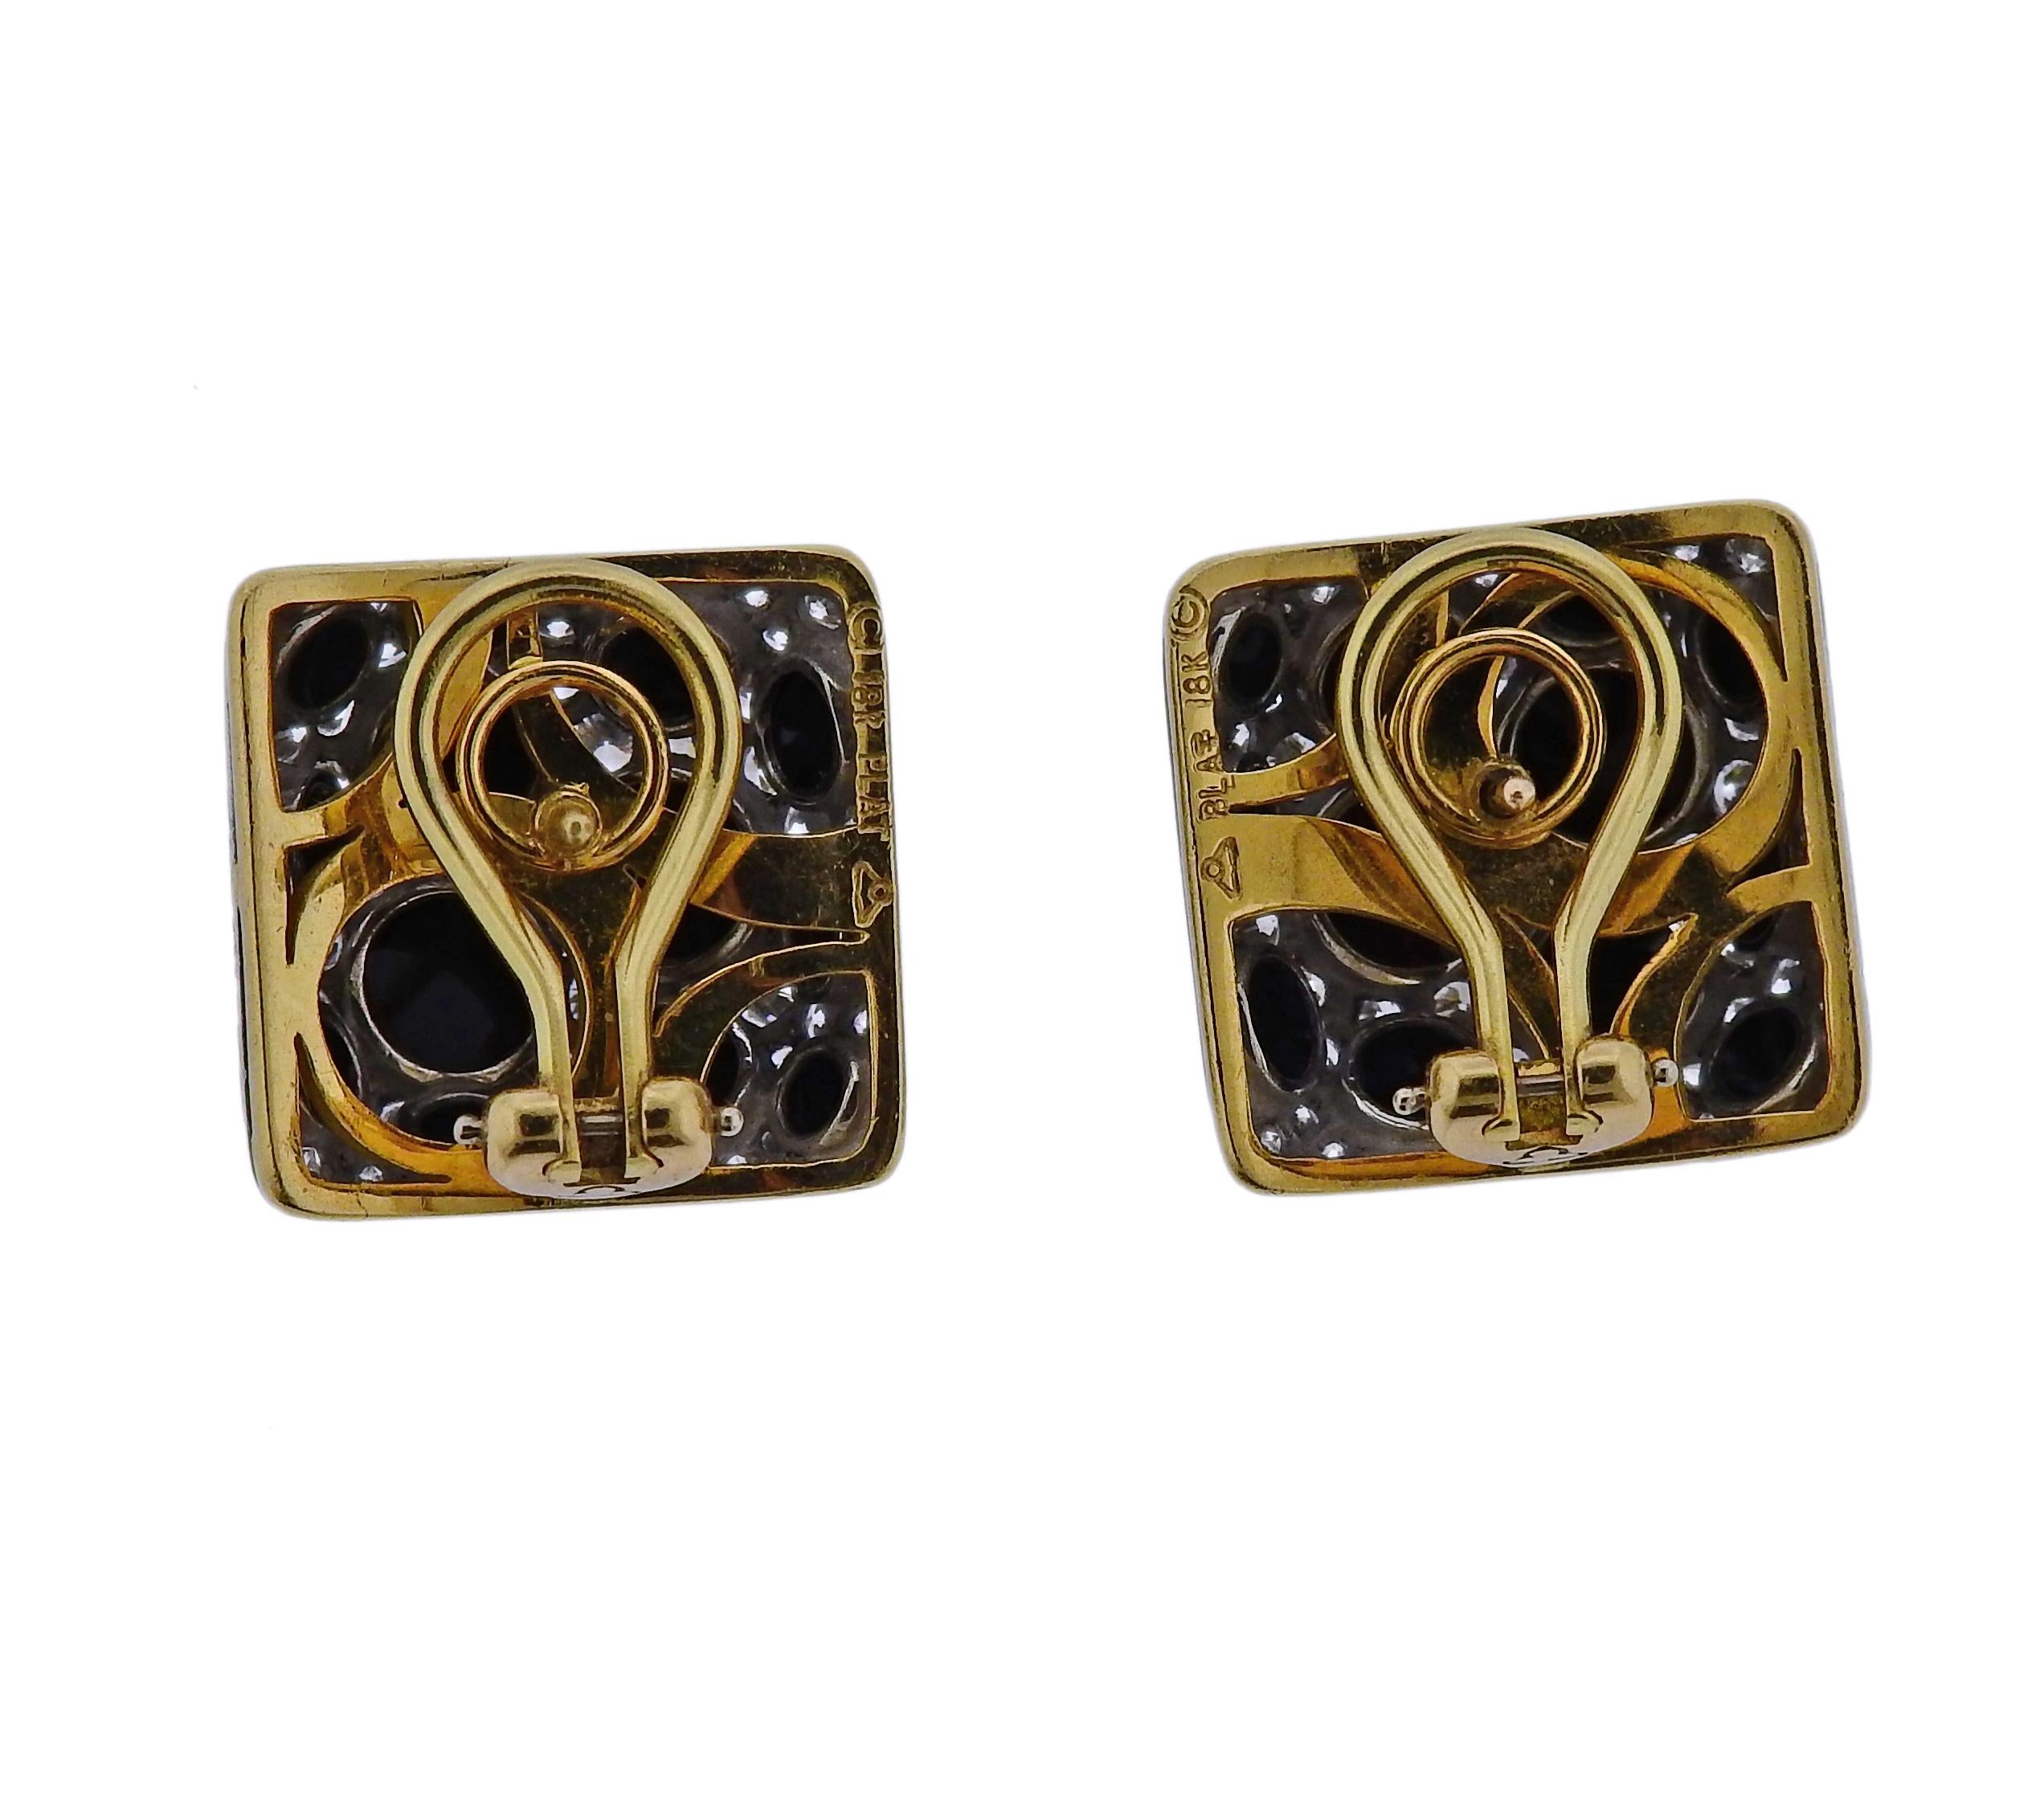 Pair of Michael Bondanza 18k gold and platinum earrings, set with approx. 2.50ctw in G/VS diamonds and inlay onyx. Earrings are 17mm x 17mm. Weigh 19.1 grams. Marked: Maker's mark, 18k, plat. 